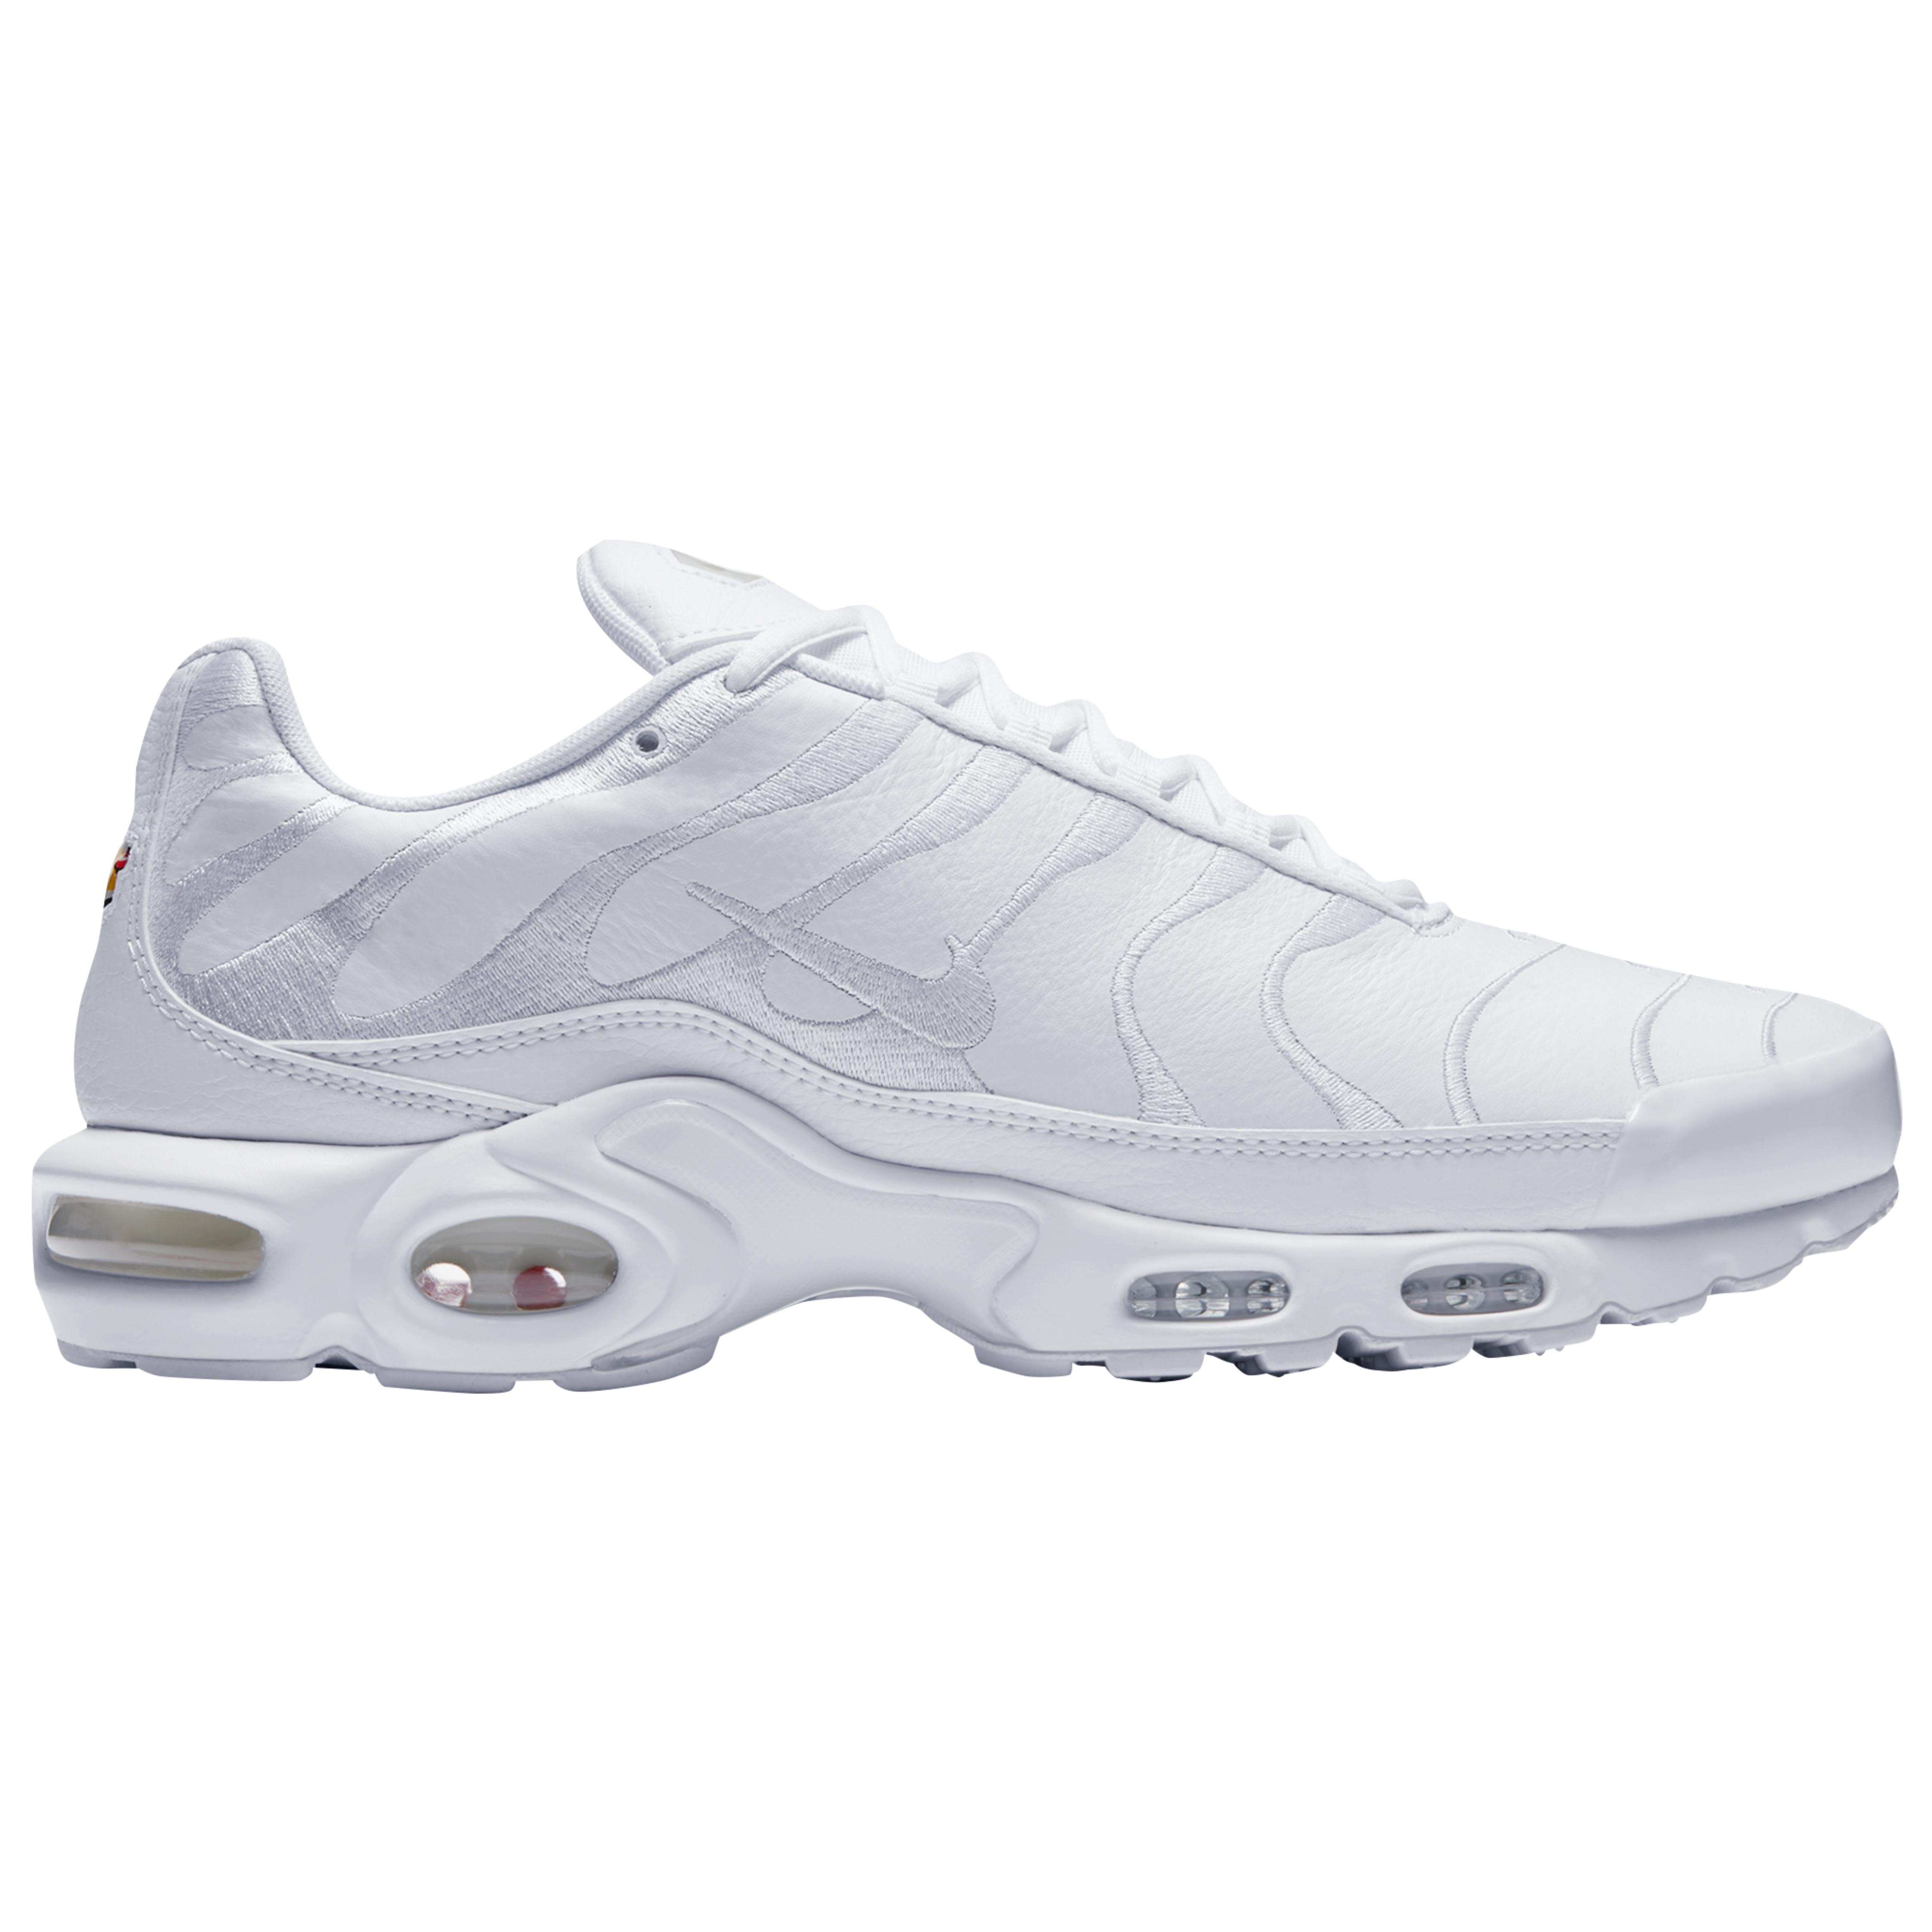 Nike Leather Air Max Plus - Running Shoes in White/White/White (White) for  Men - Save 18% - Lyst